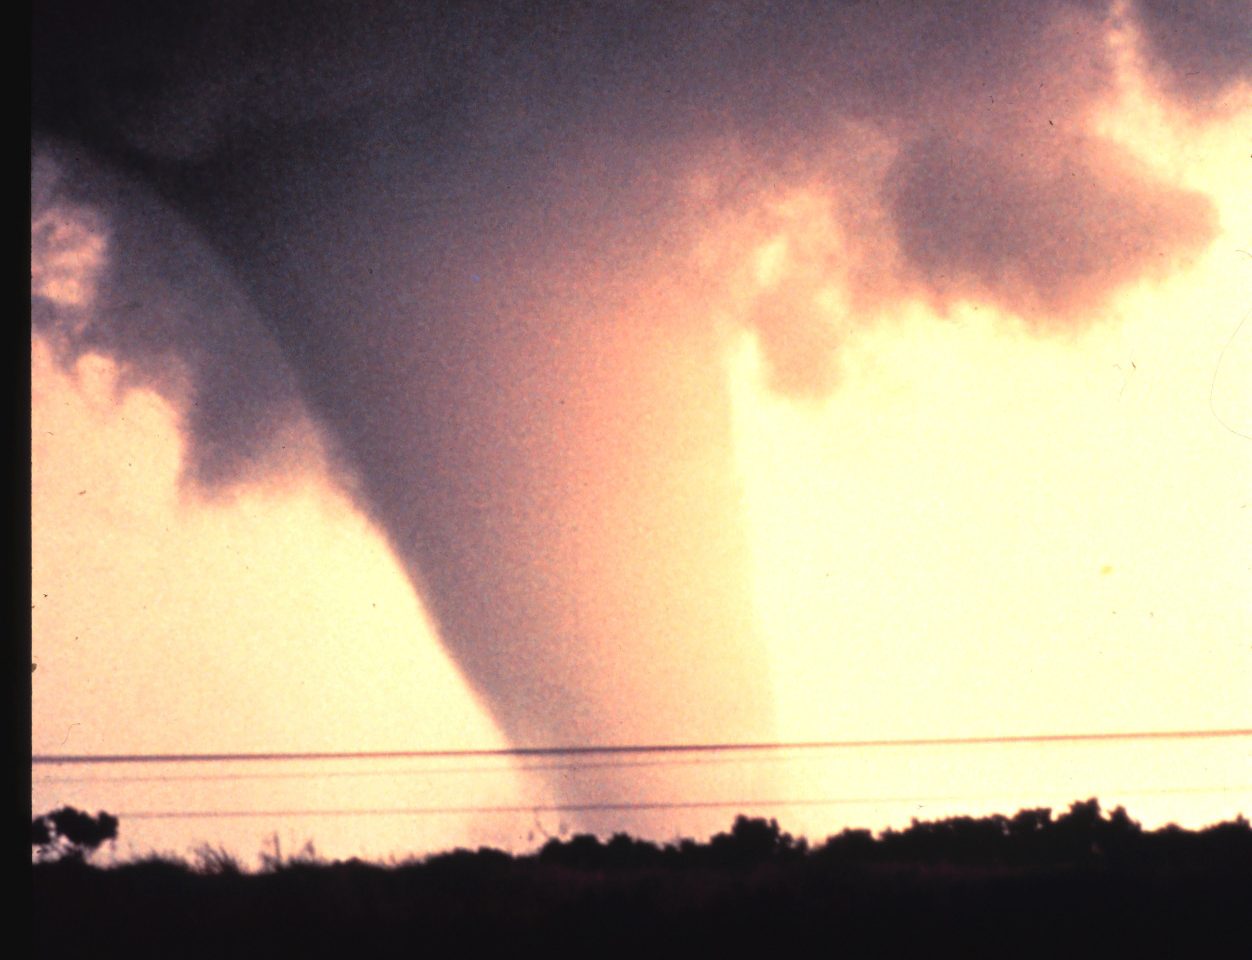 The 40th anniversary of the Union City, OK tornadic storm